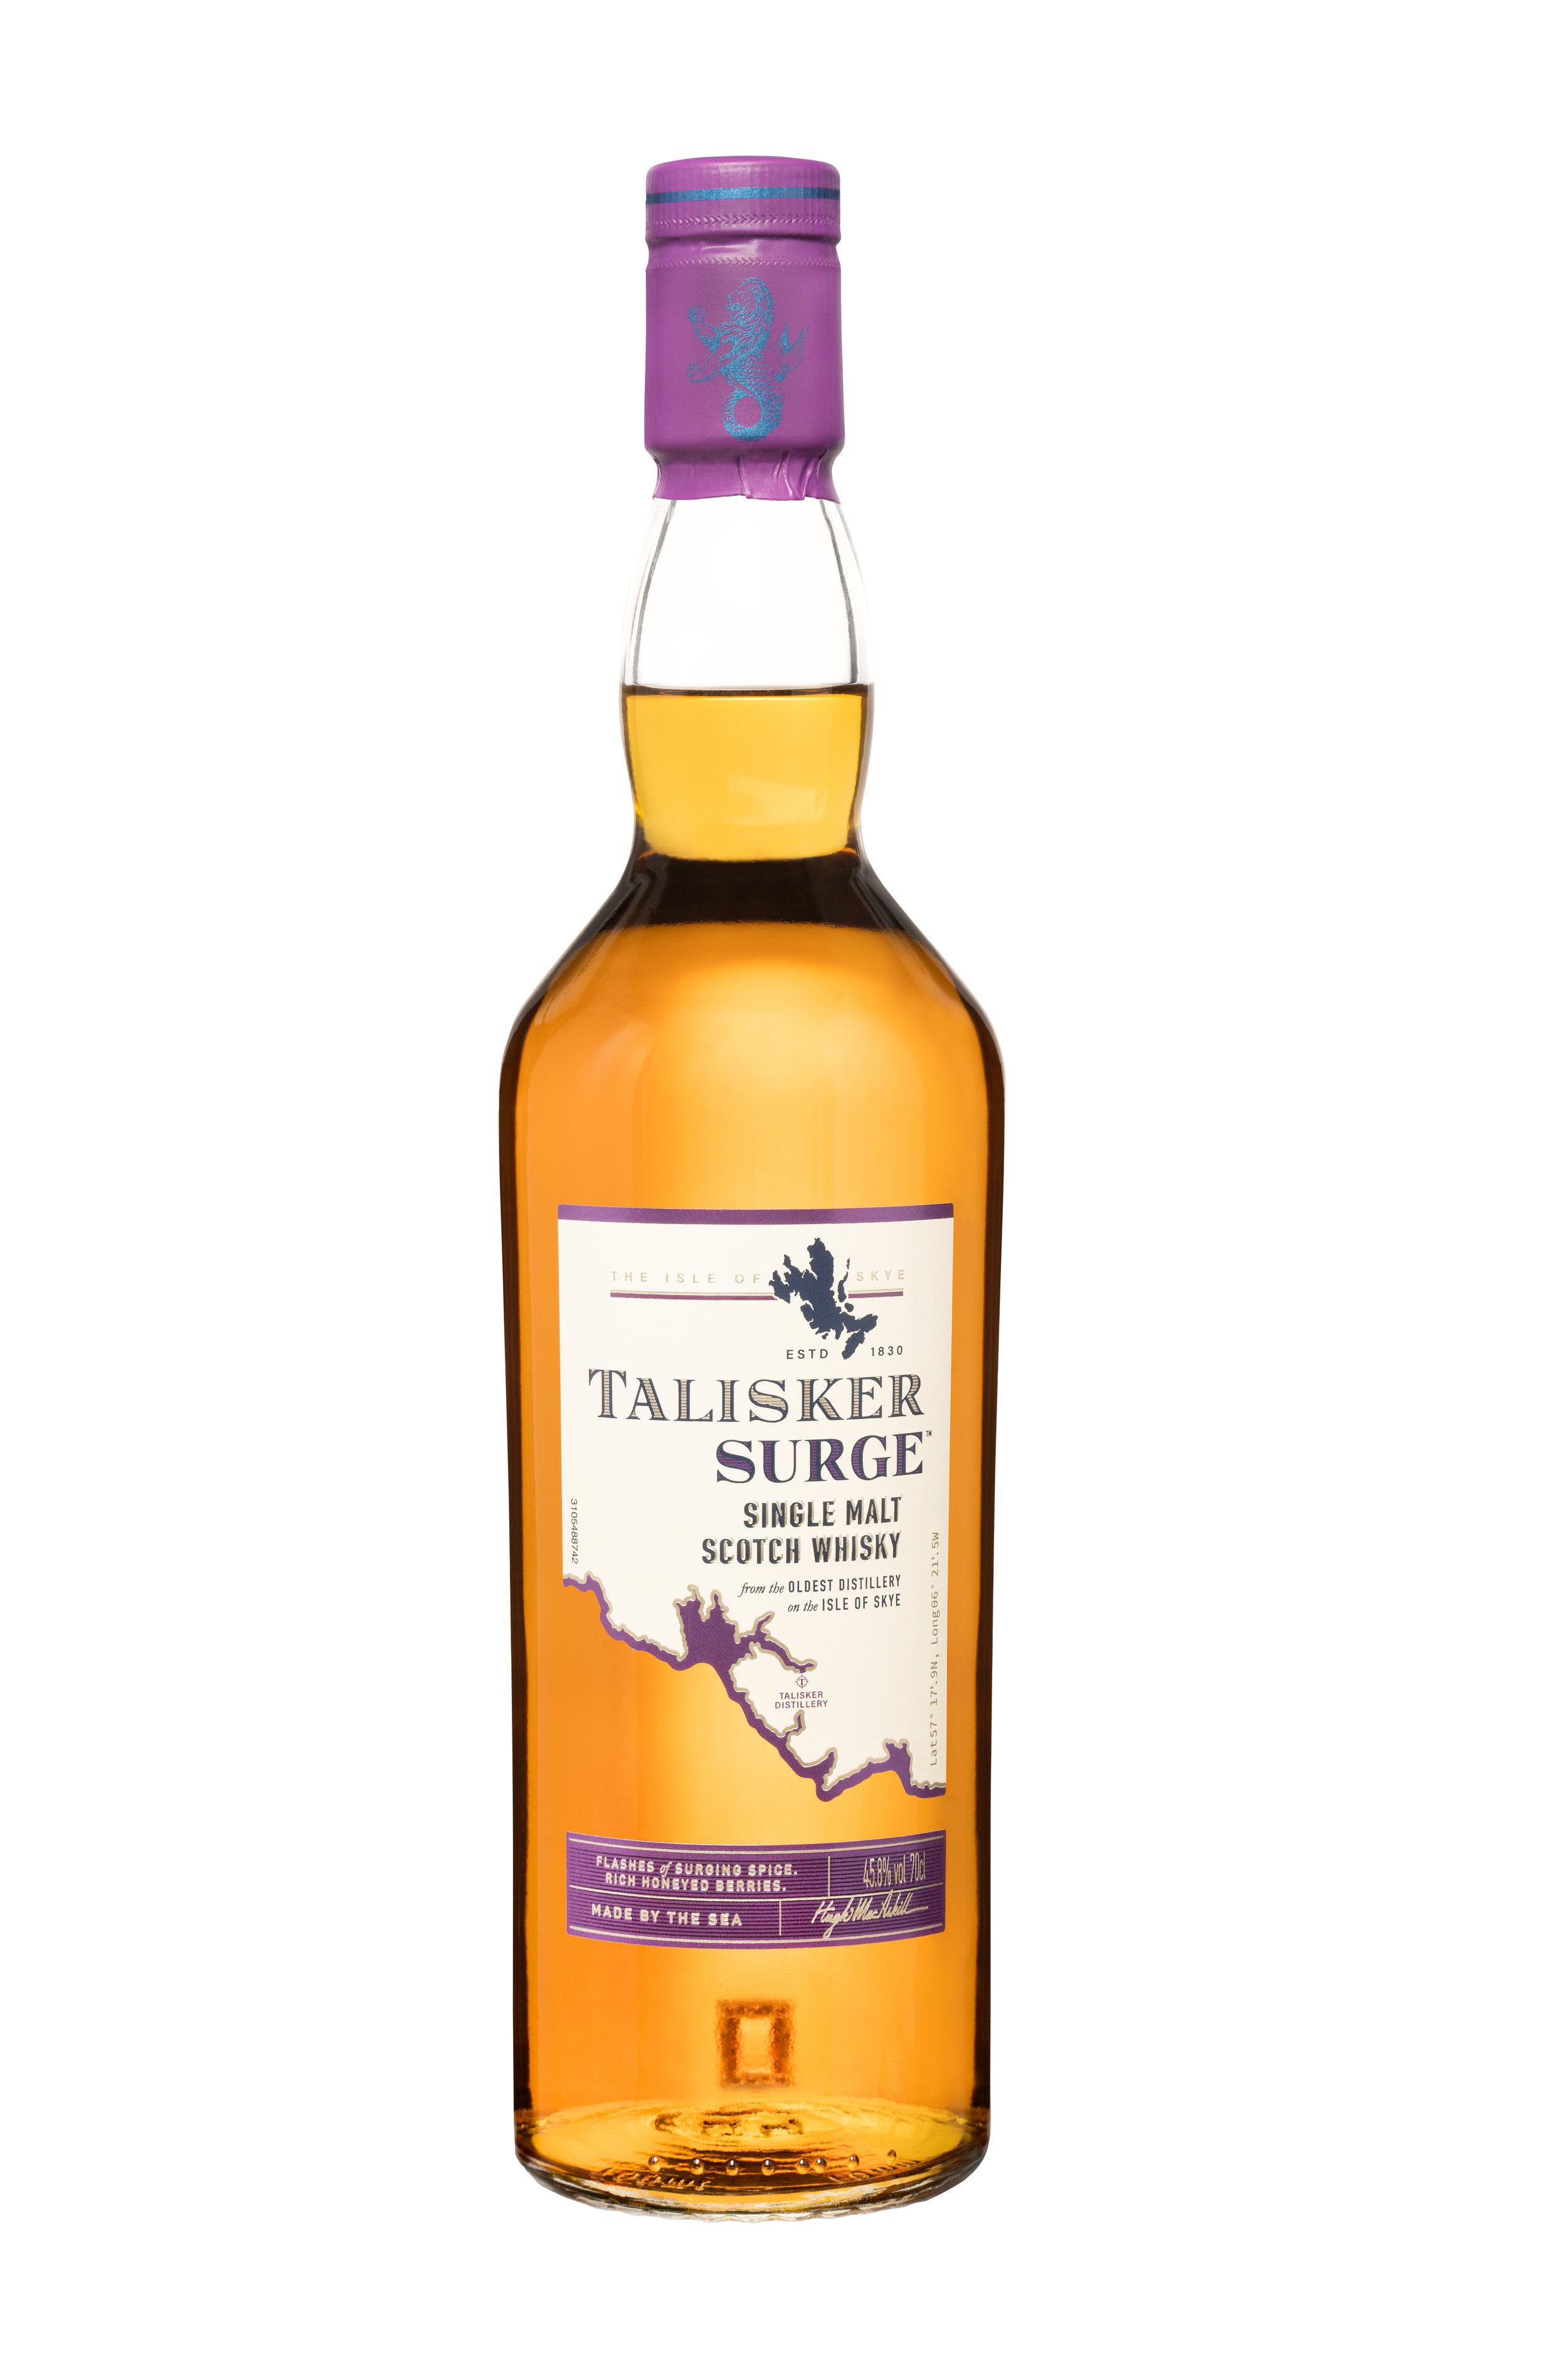 Talisker surges into airports with new travel retail exclusive